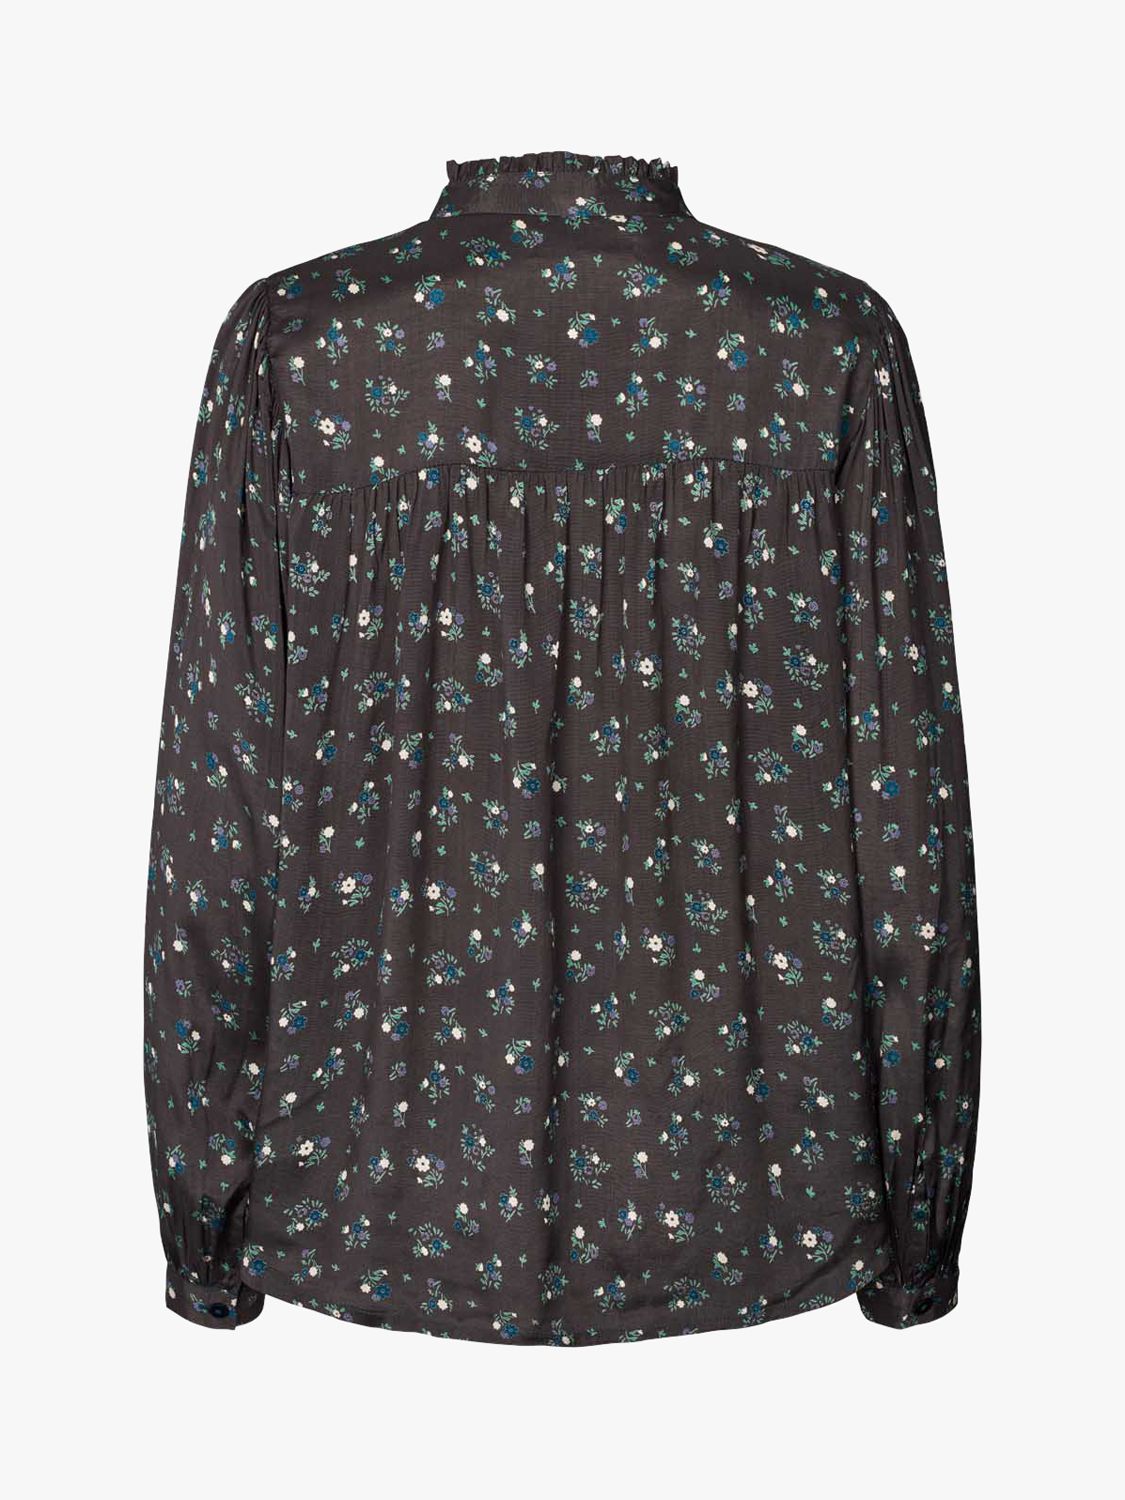 Buy Lollys Laundry Cara Long Sleeve Shirt, Washed Black Online at johnlewis.com